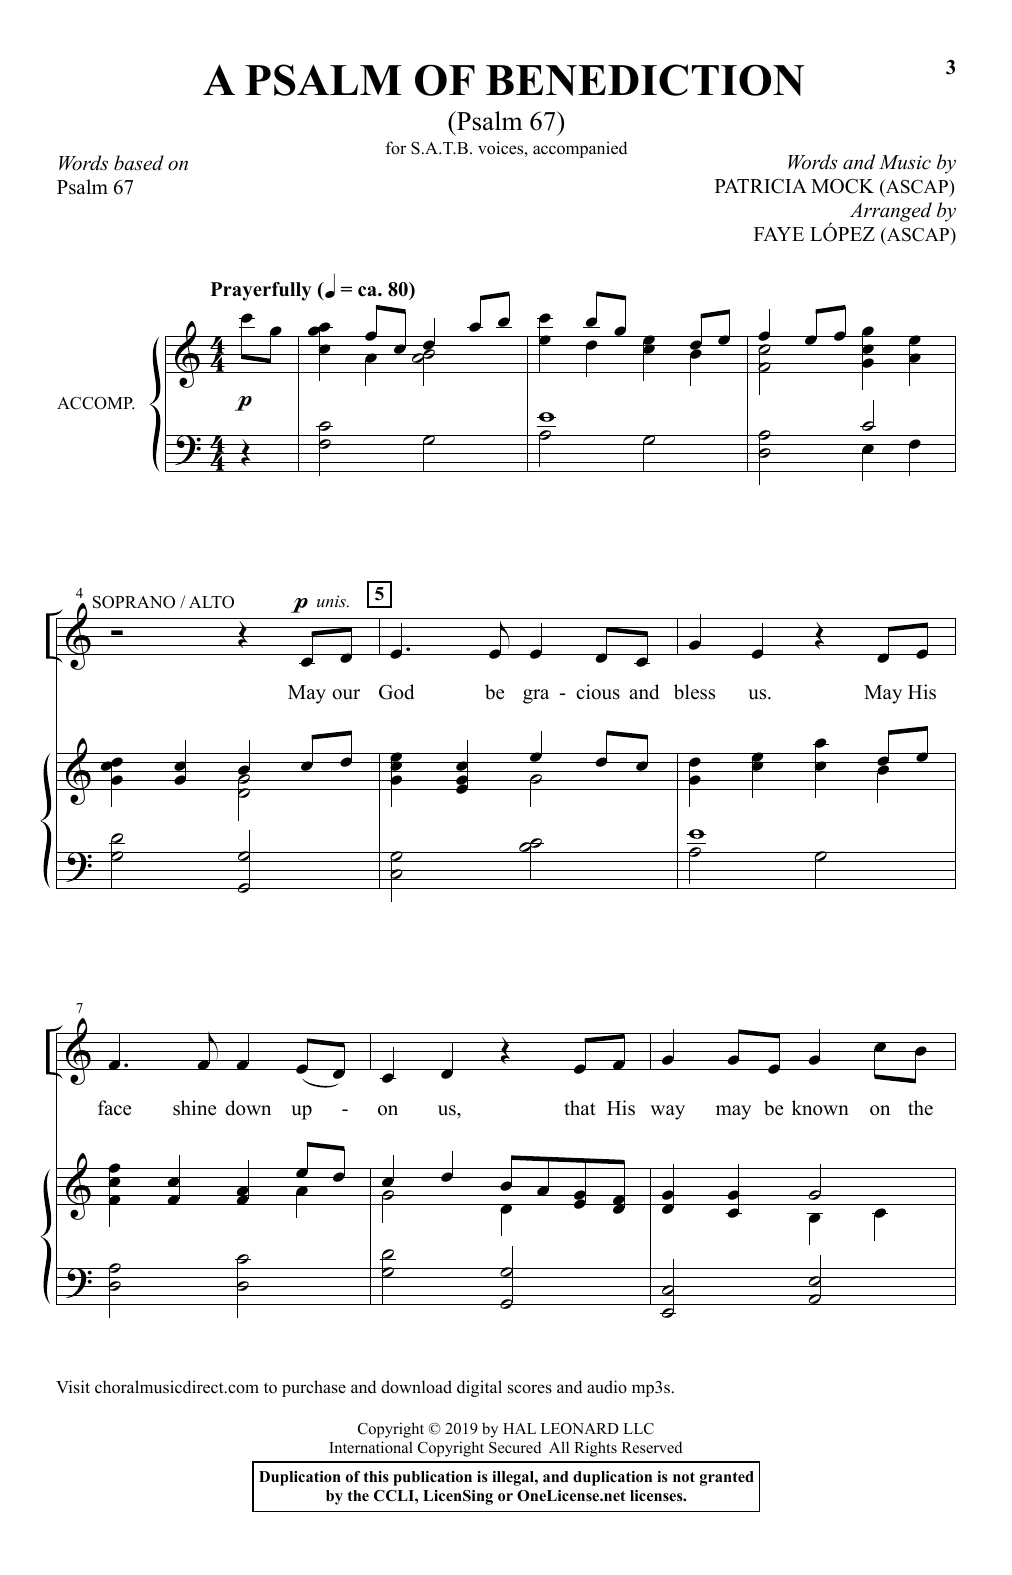 Download Patricia Mock A Psalm Of Benediction (Psalm 67) (arr. Sheet Music